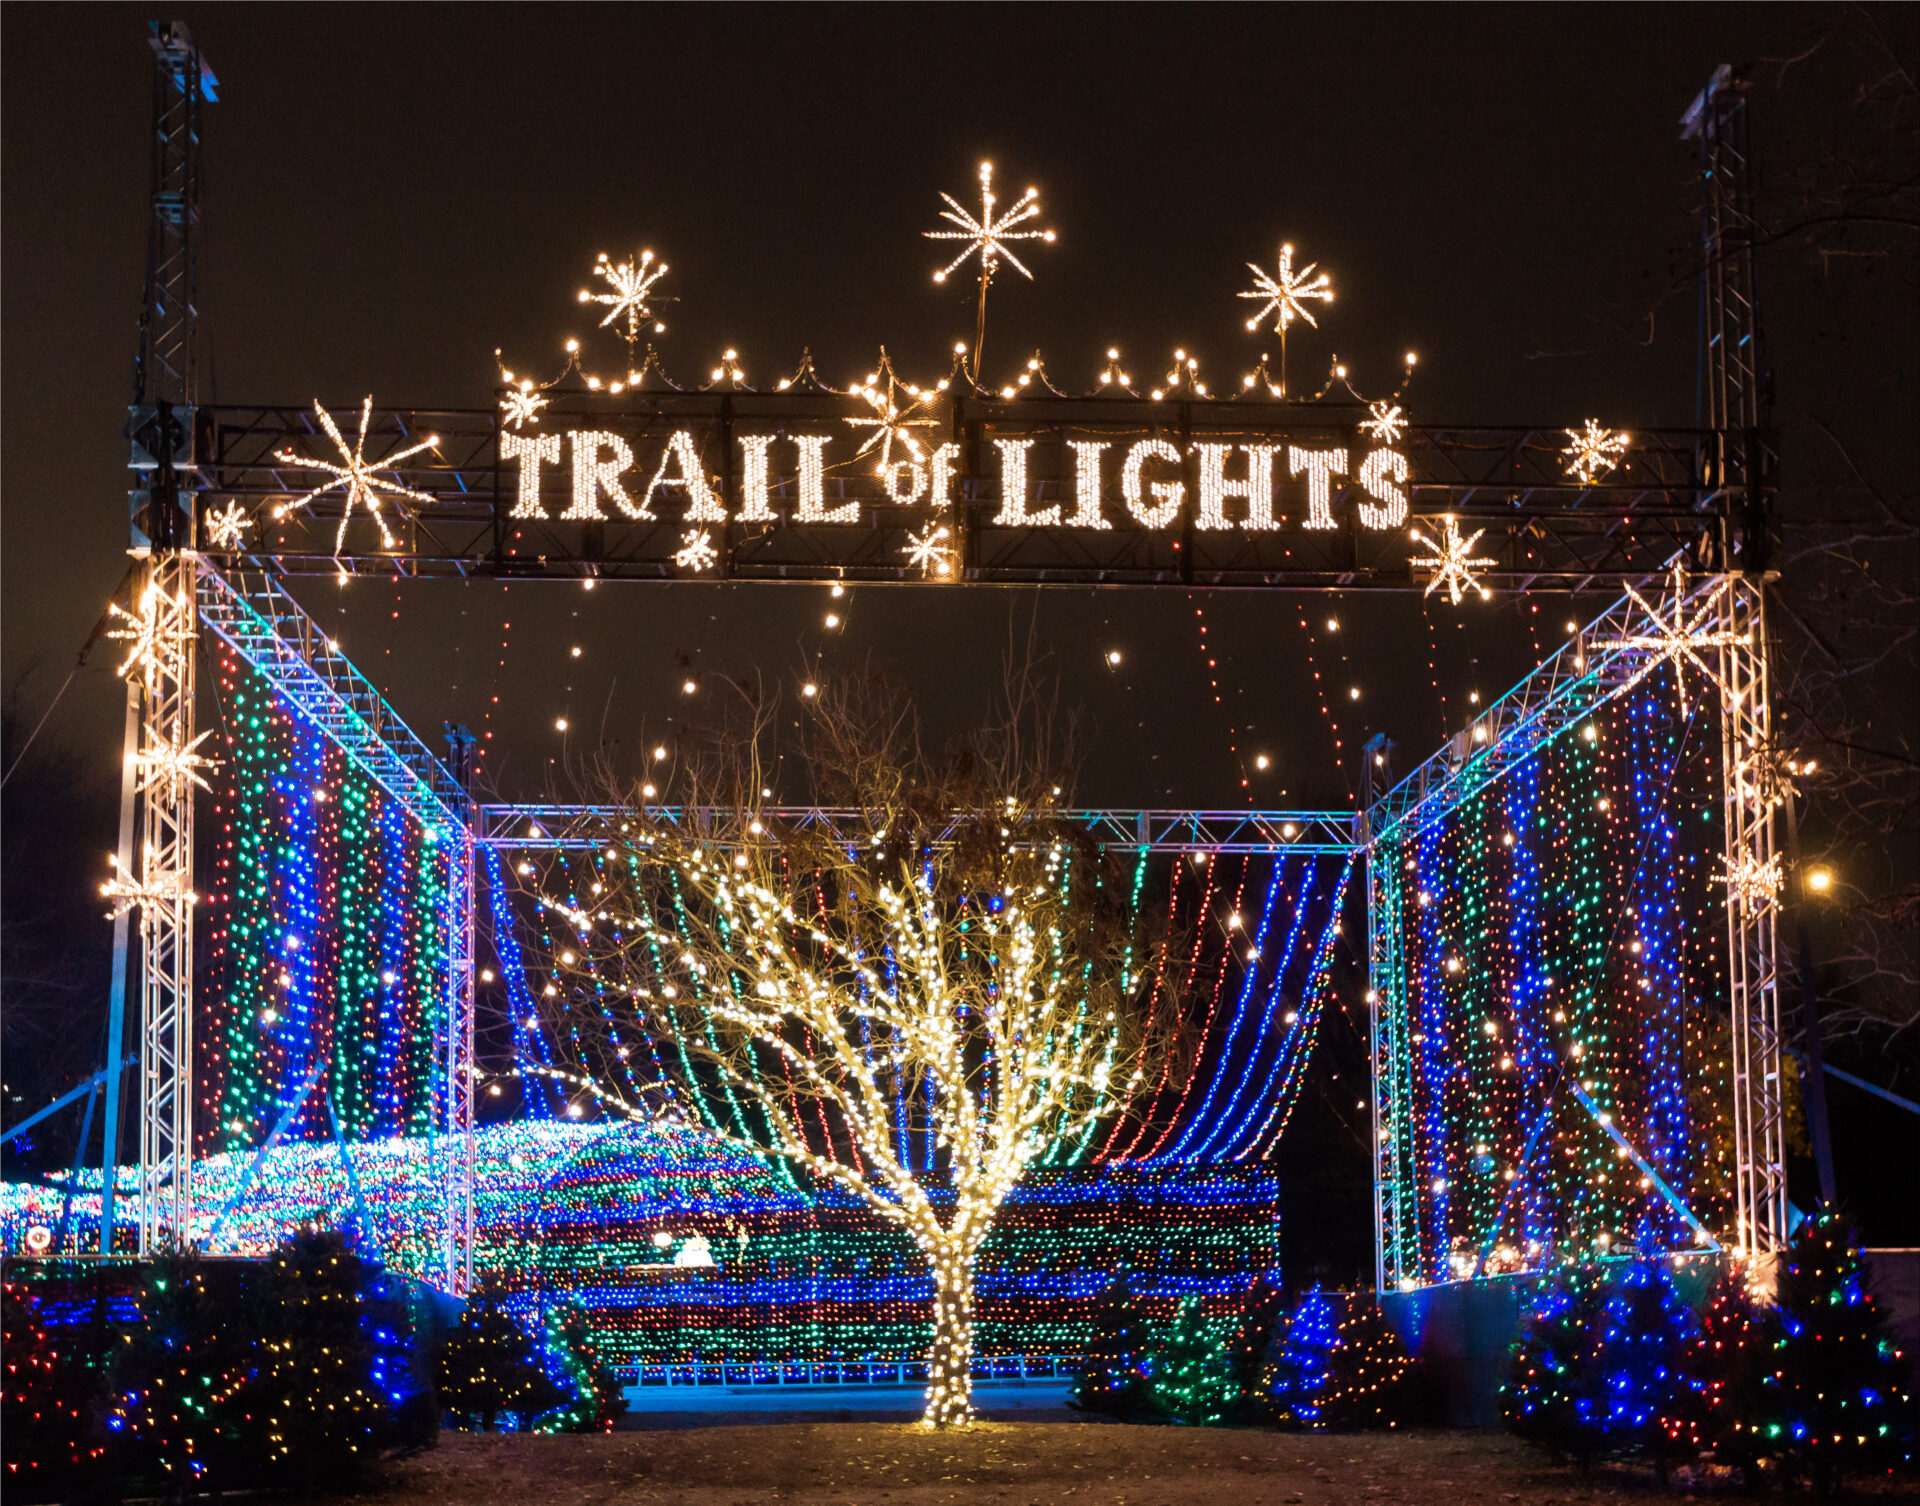 Trail of Lights, one of the Austin Christmas Activities